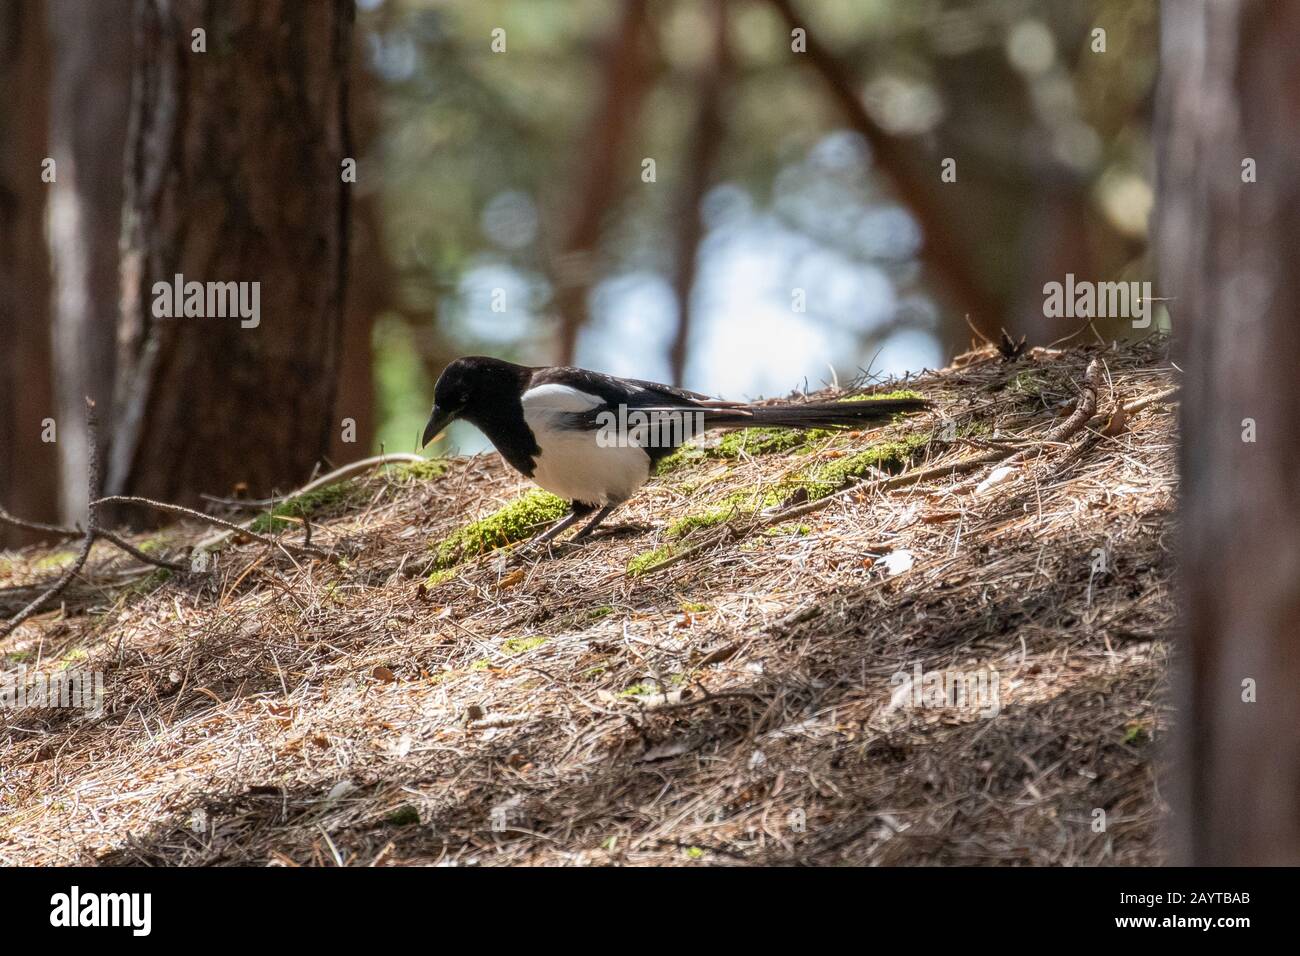 A magpie searching for food along the forest floor Stock Photo